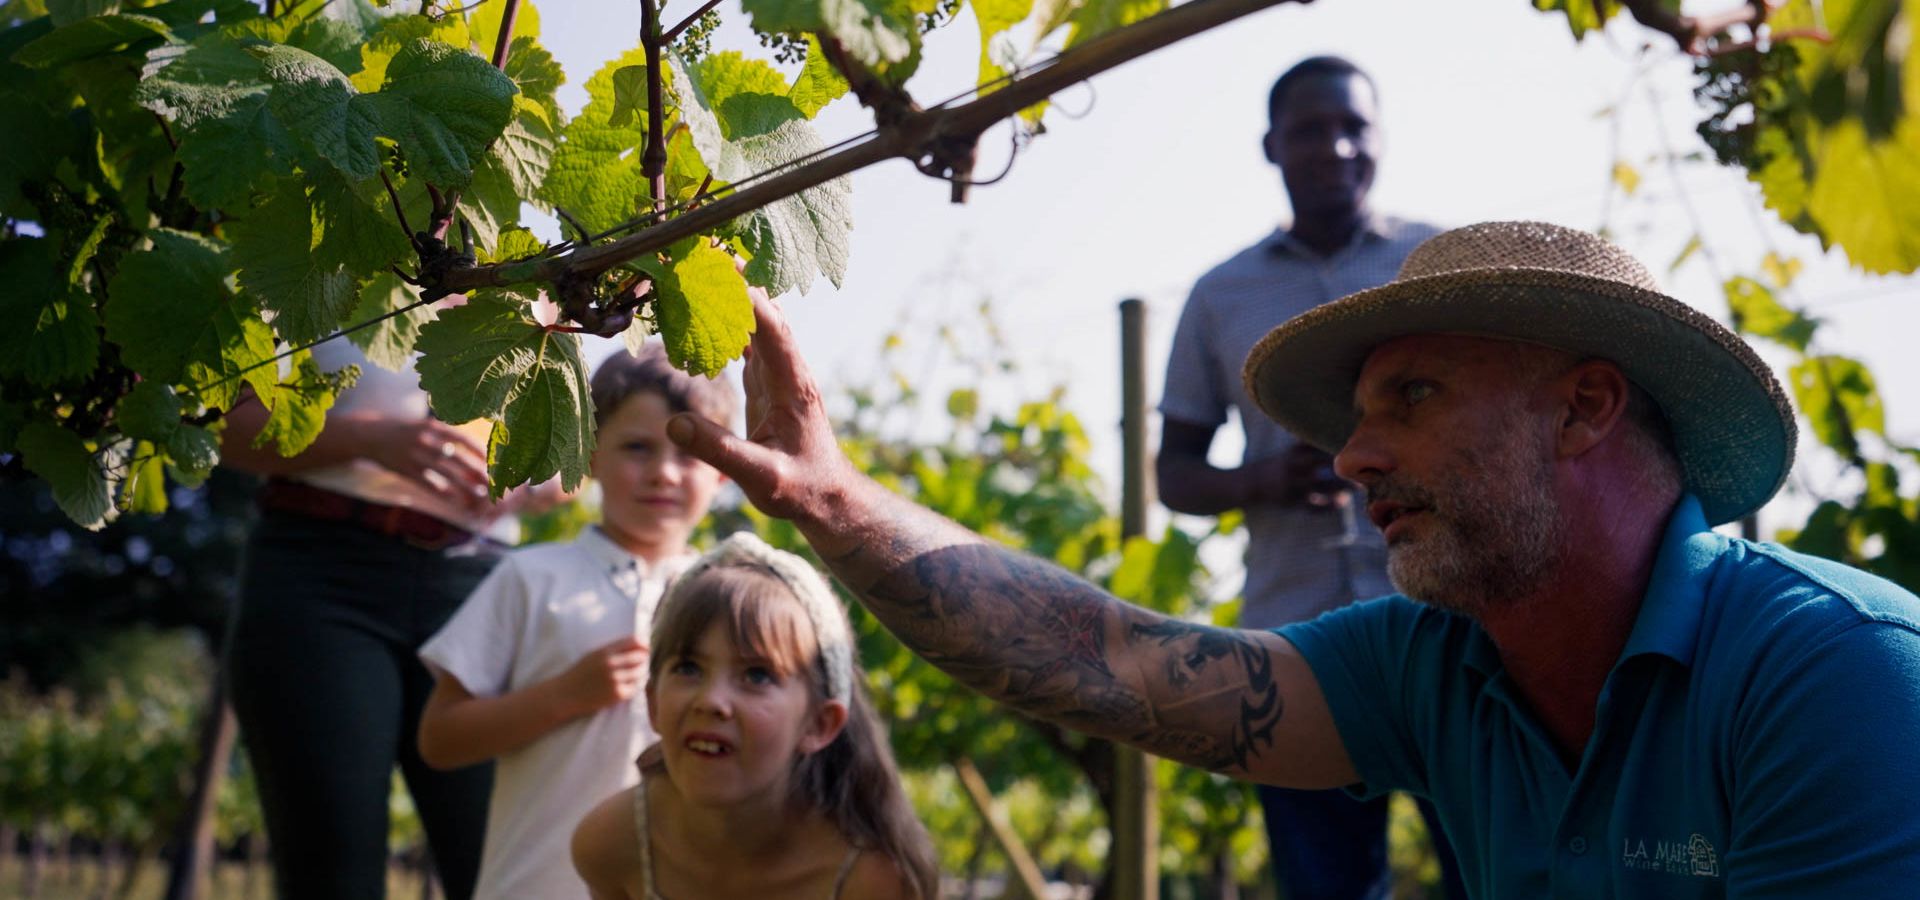 Children and wine maker looking at vines at La Mare Wine Estate